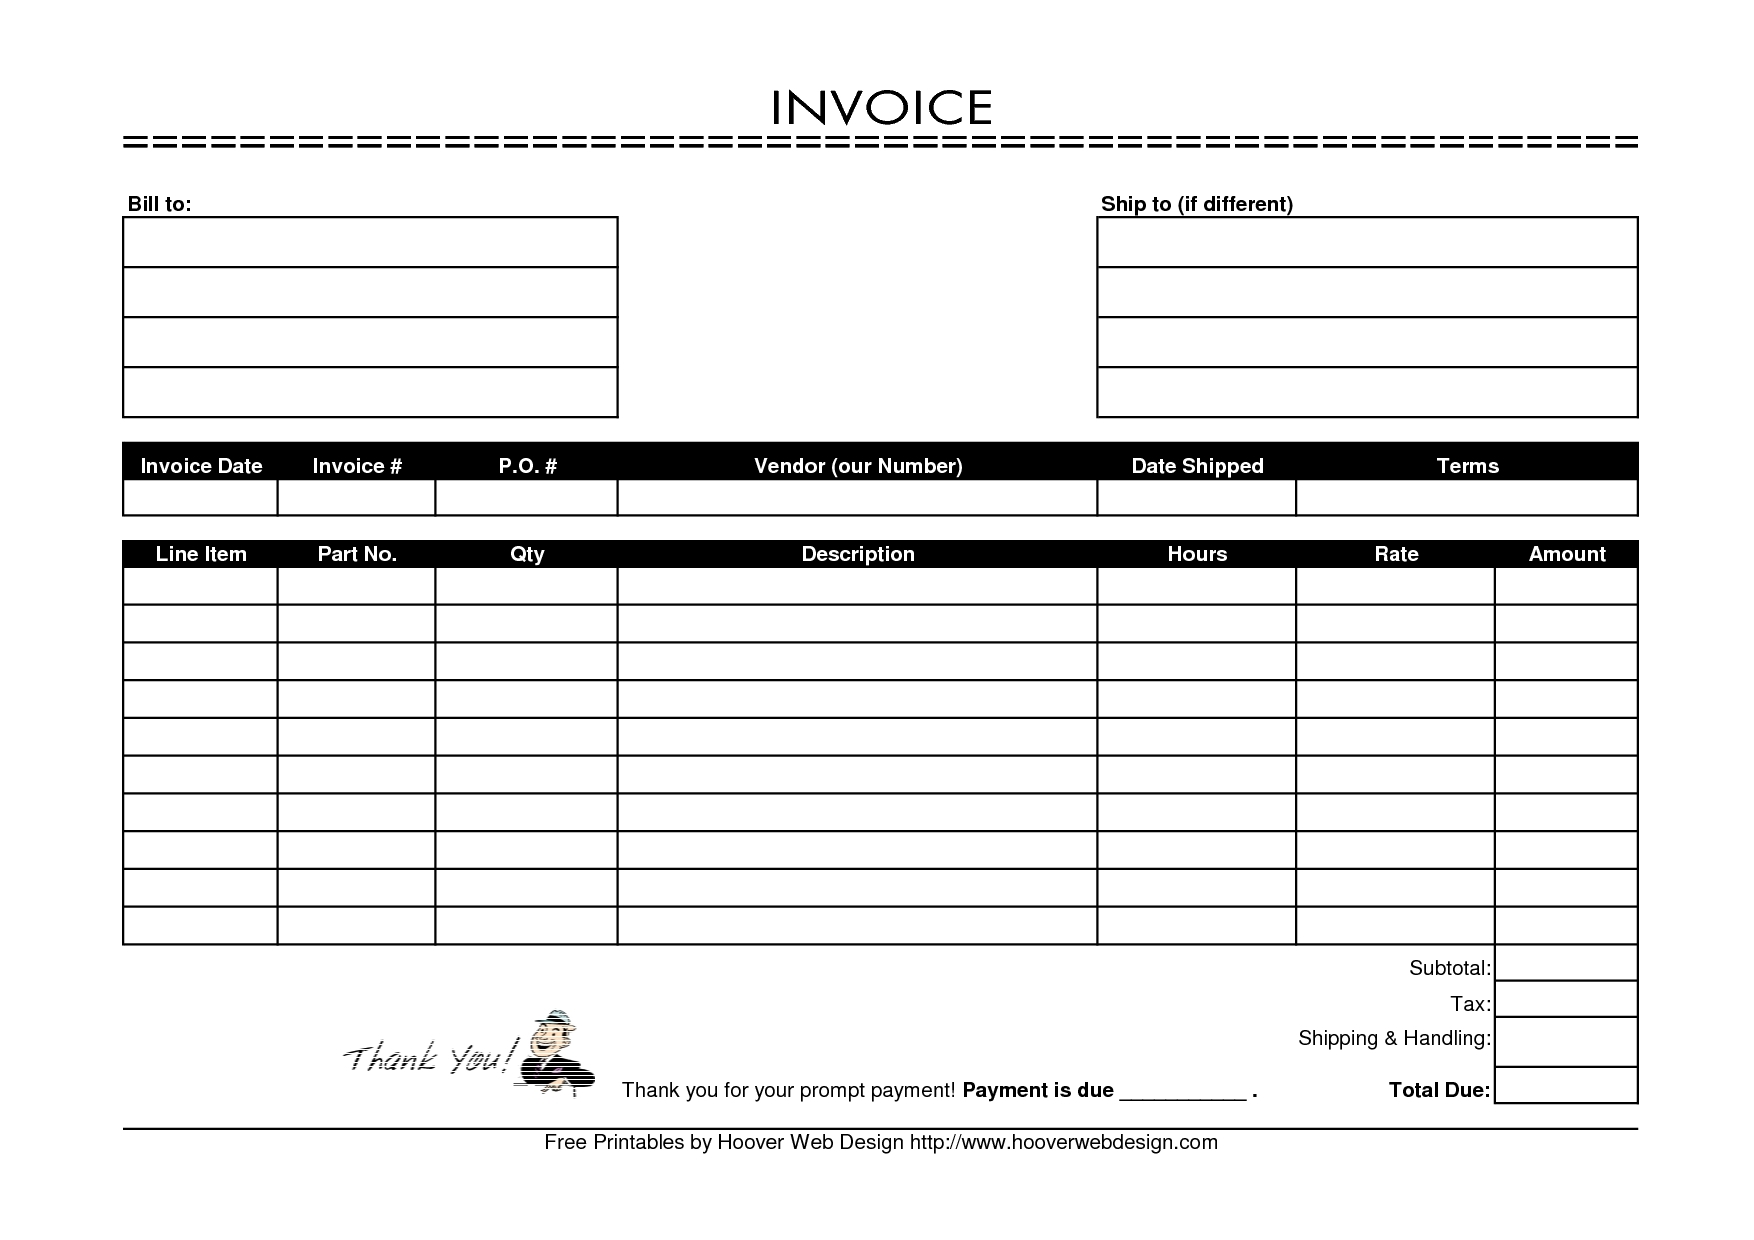 free printable invoice template 9 examples of printable invoice create free invoice